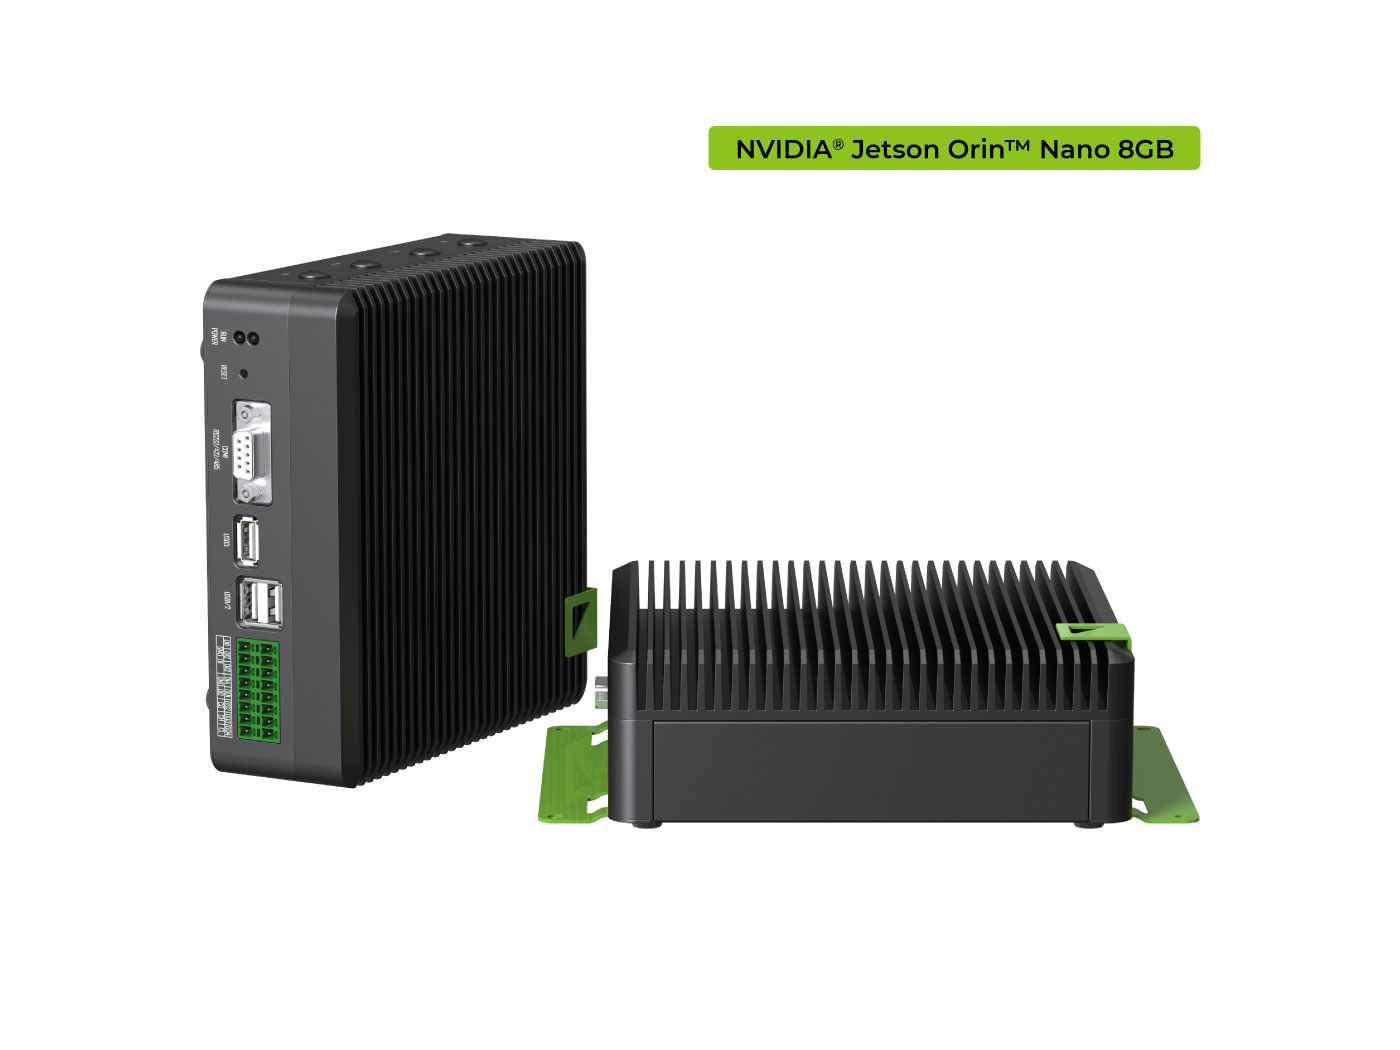 [110110193]reComputer?Industrial?J3011- Fanless Edge AI Device with Jetson Orin Nano 8GB module, Aluminum case with passive cooling, 2xRJ45 GbE, 1xRS232/RS-422/RS-485, 4xDI/DO, 1xCAN, 3xUSB3.2, Pre-installed Jet